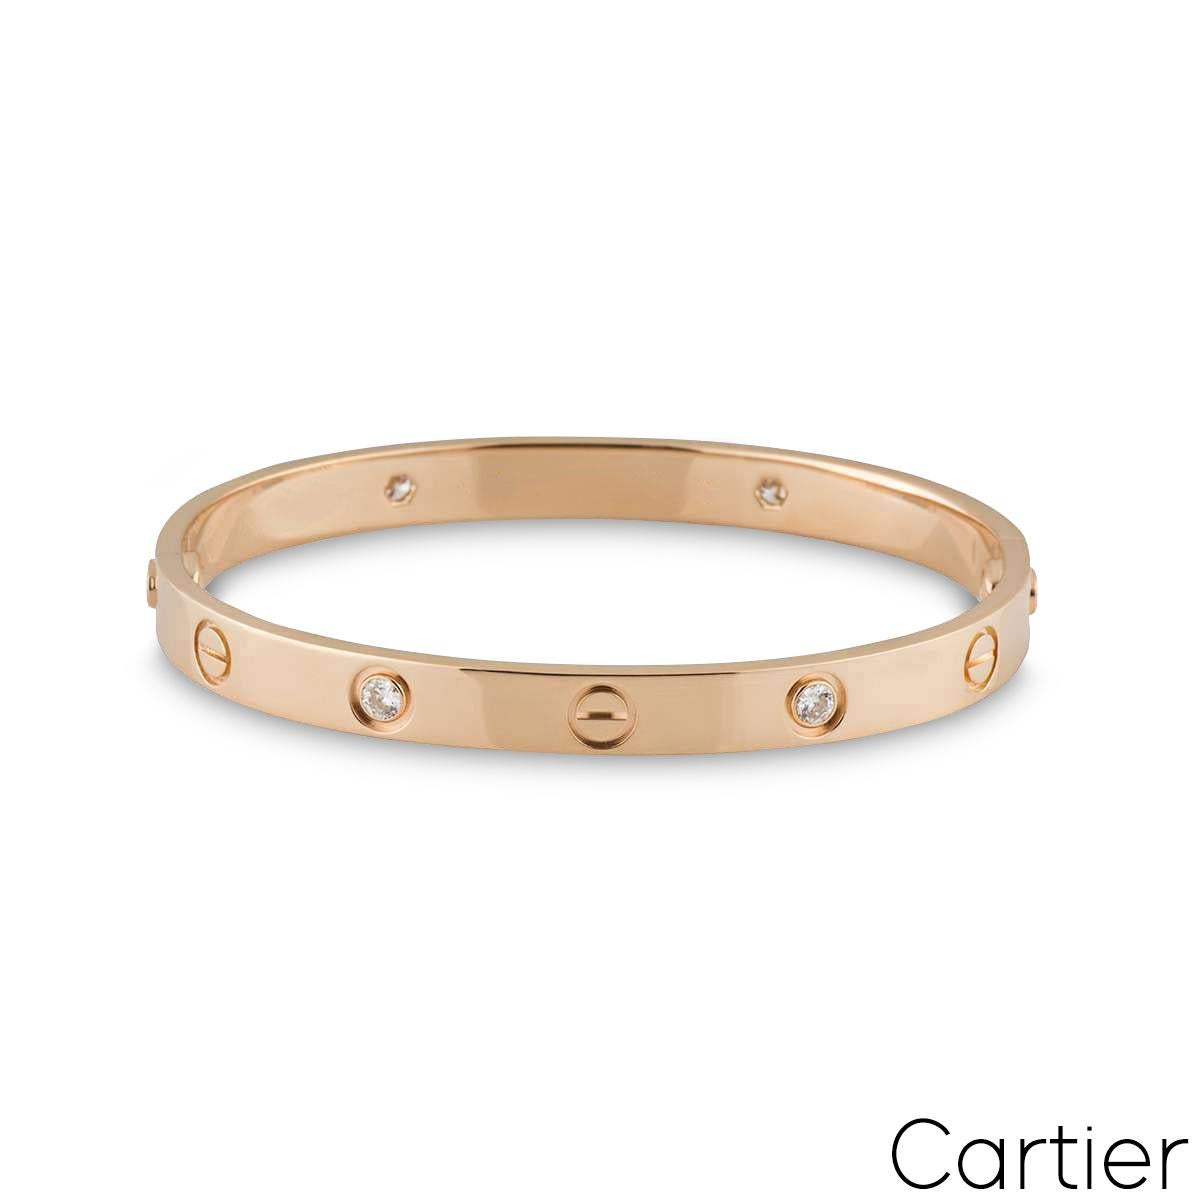 An iconic 18k rose gold half diamond Cartier bracelet from the Love collection. The iconic screw motif alternates with 4 round brilliant cut diamonds on the outer edge of the bracelet totaling 0.42ct. The bracelet is a size 17 and features the new